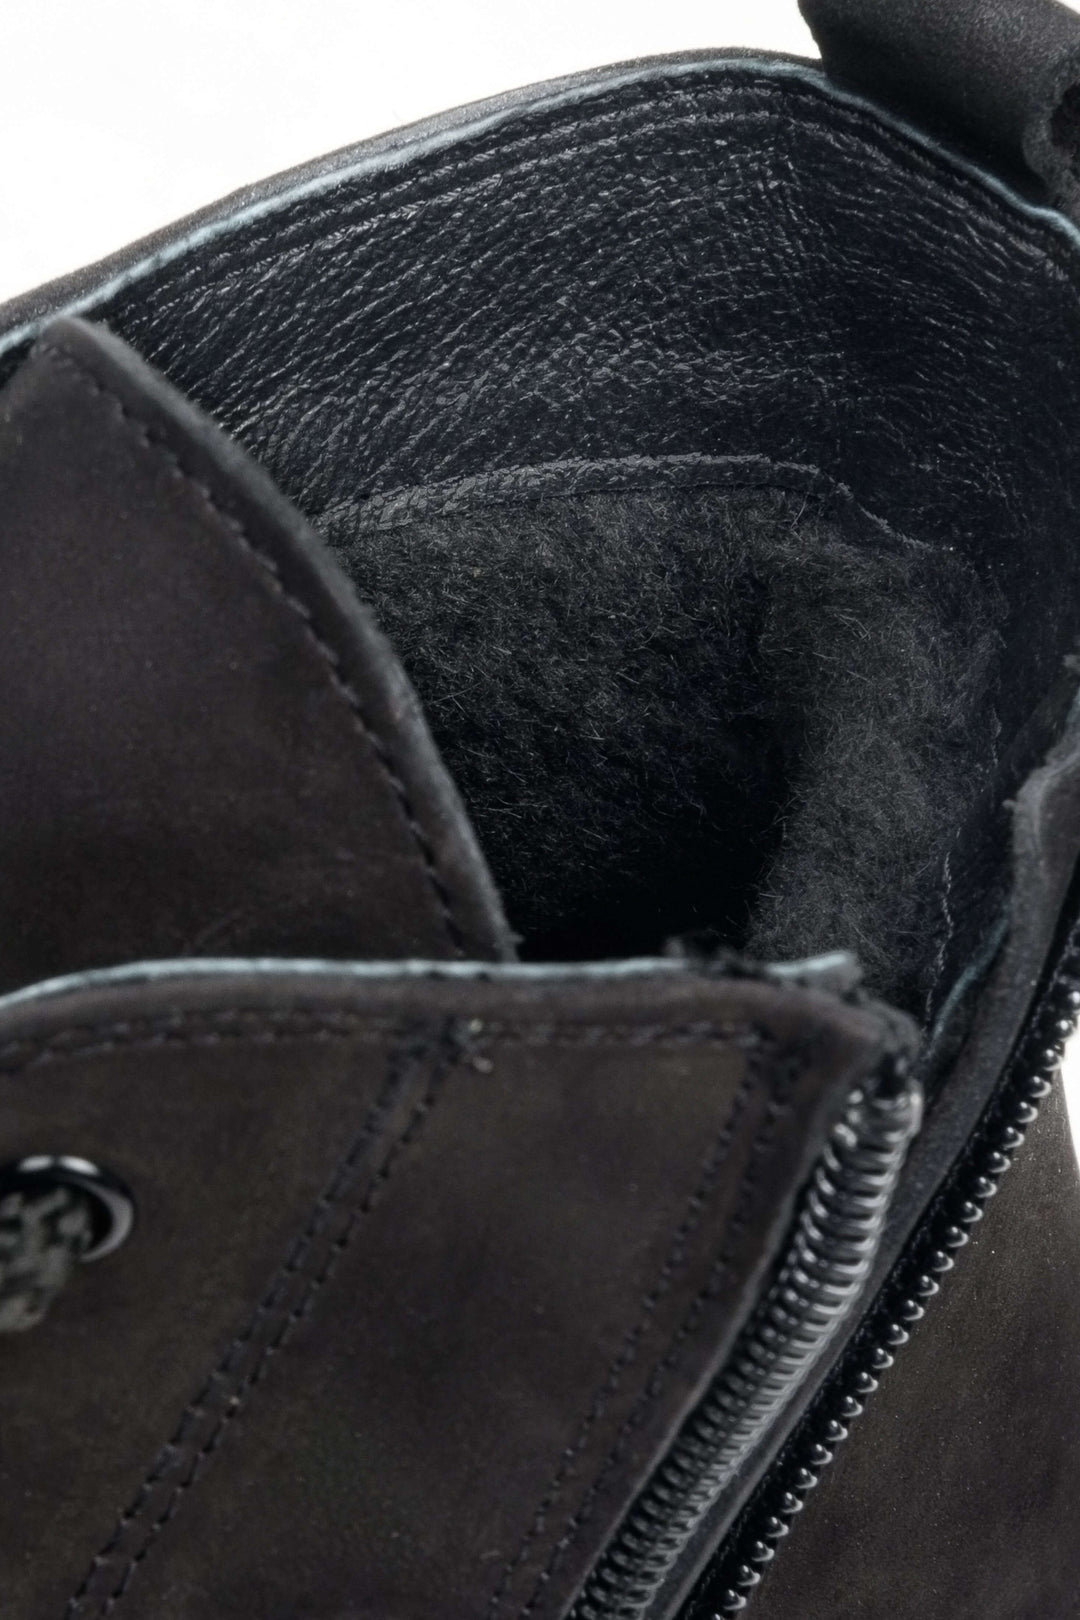 High-top men's sneakers in black - close-up on the shoe's padding.